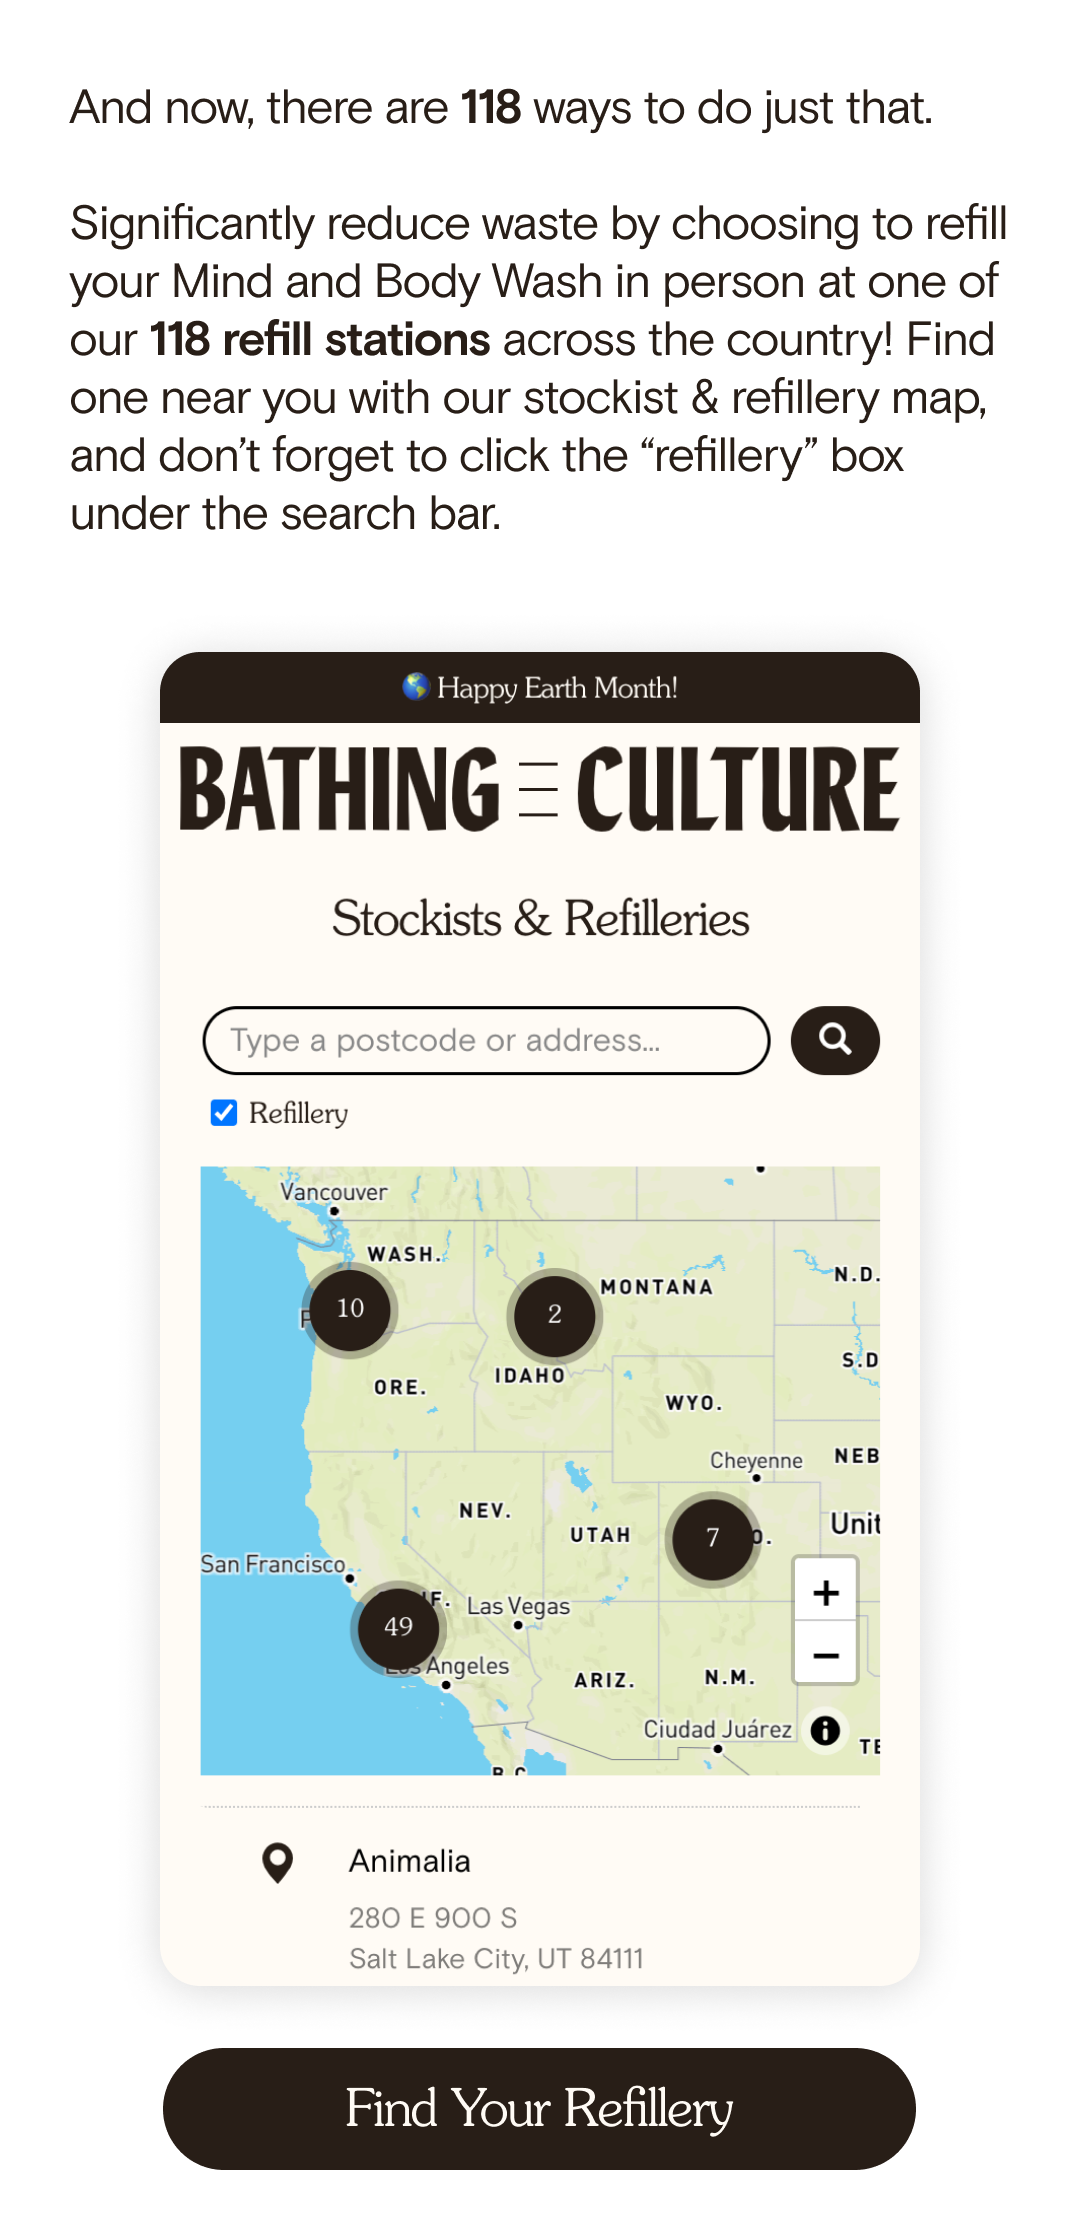 And now, there are 118 ways to do just that. Significantly reduce waste by choosing to refill your Mind and Body Wash in person at one of our 118 refill stations across the country! Find one near you with our stockist & refillery map, and don’t forget to click the “refillery” box under the search bar. Find Your Refillery